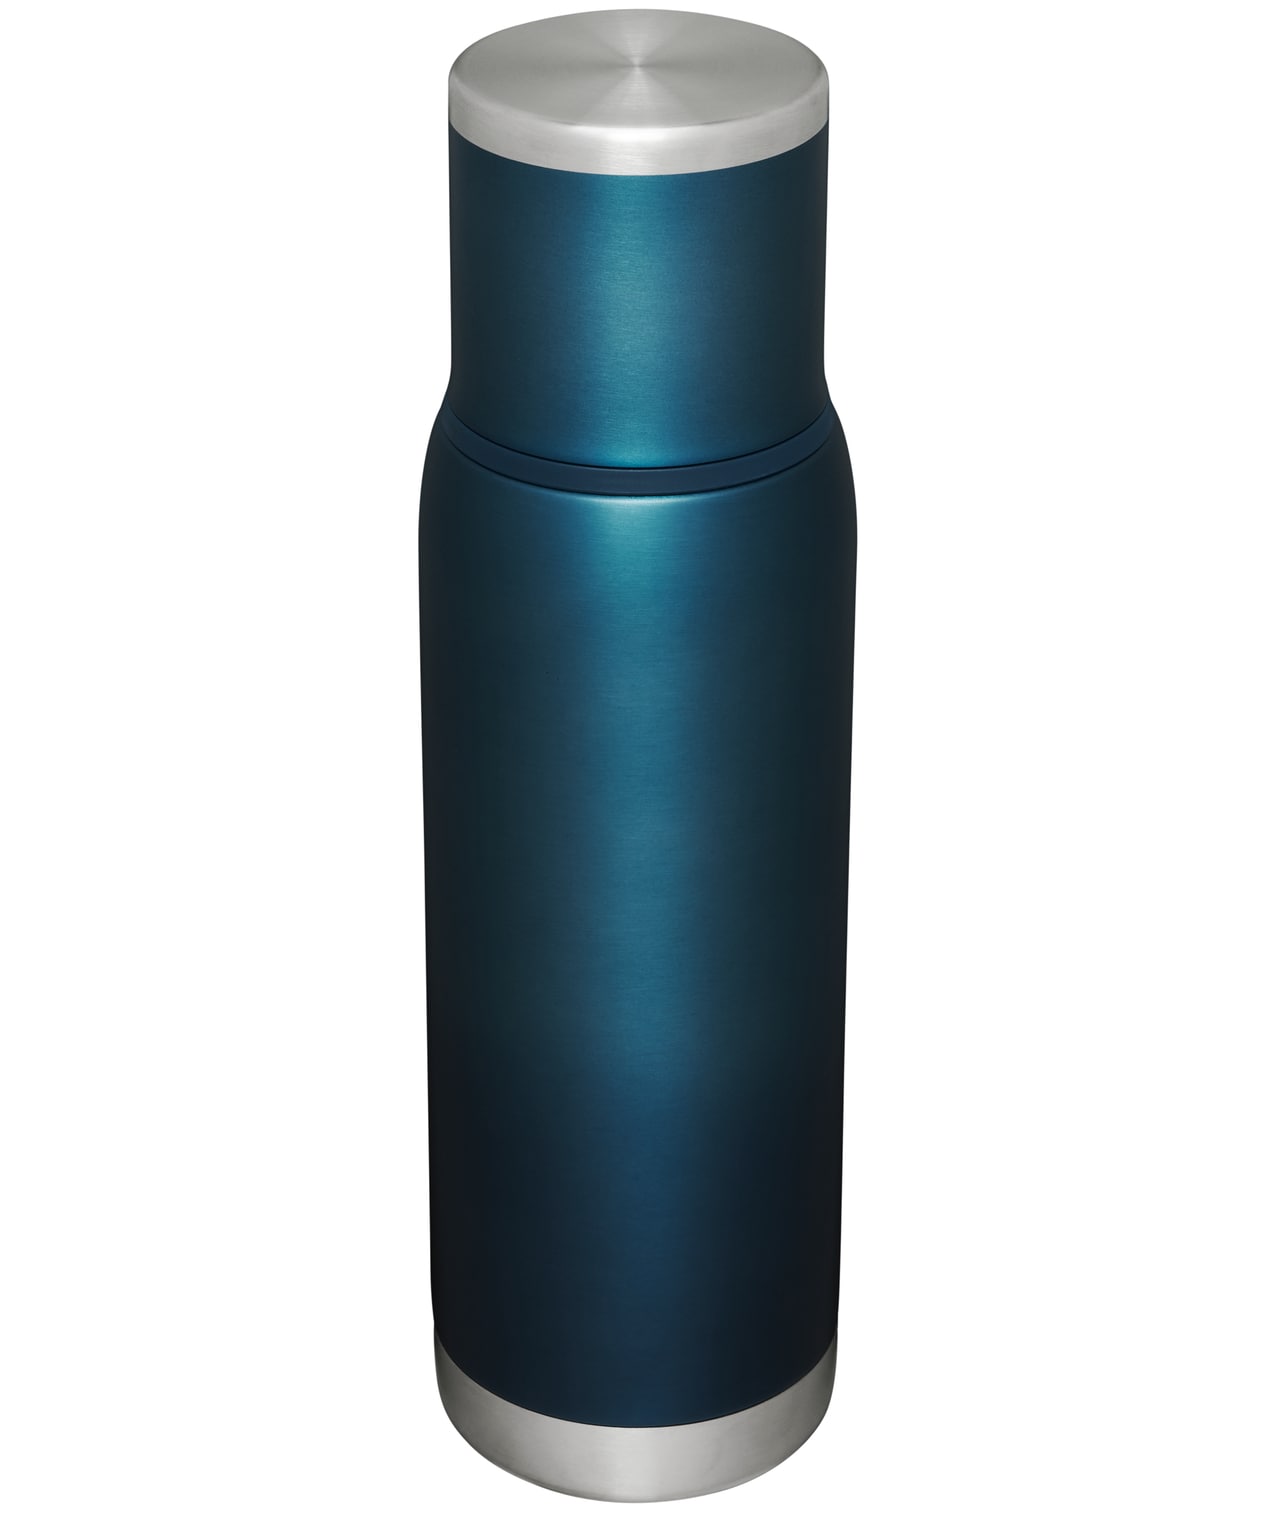 Coleman Brew Insulated Stainless Steel Tumbler, 30 oz., Blue Nights 